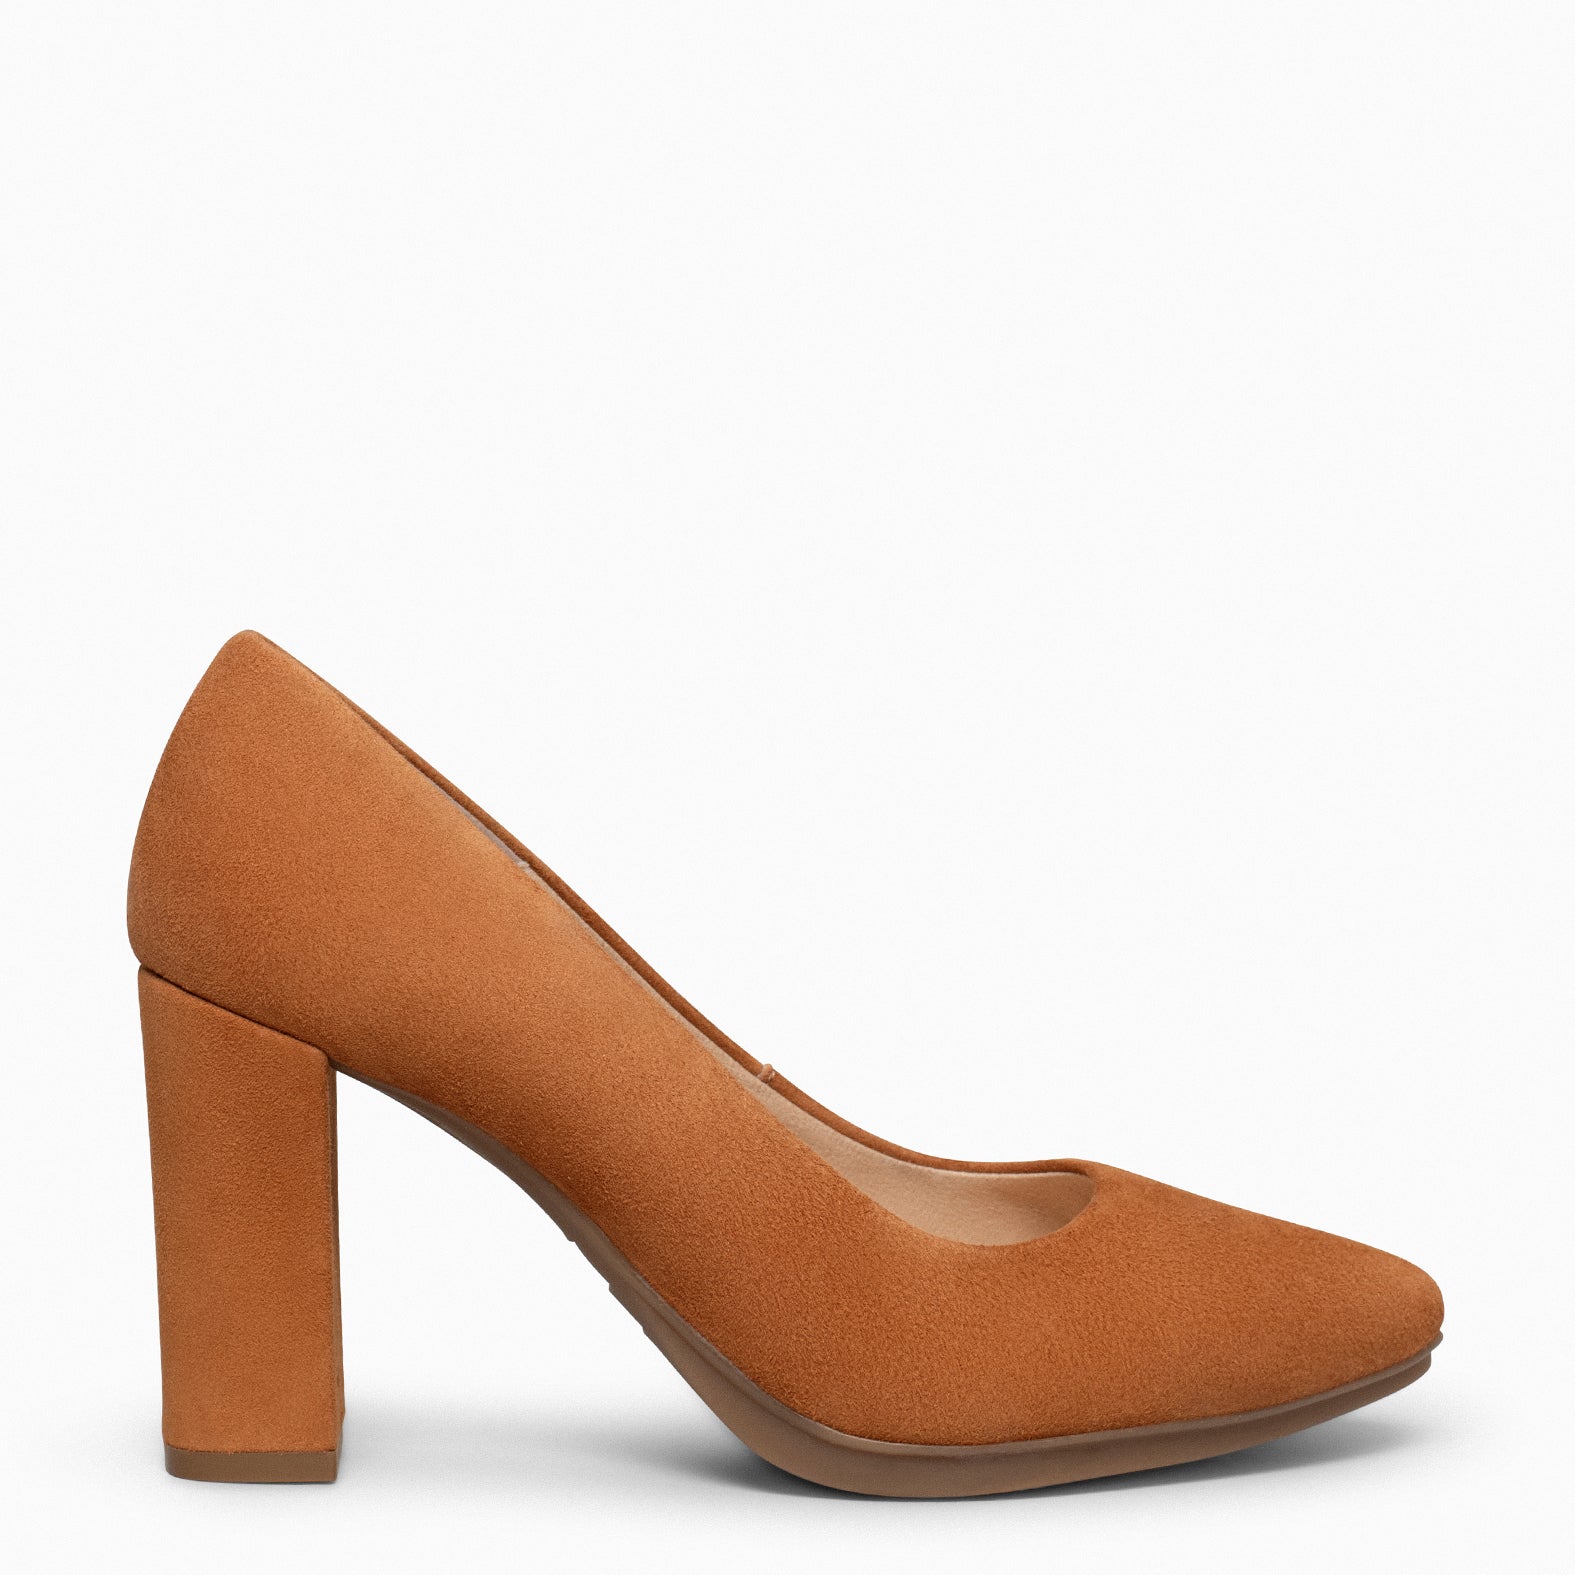 URBAN – CAMEL Suede high-heeled shoes 